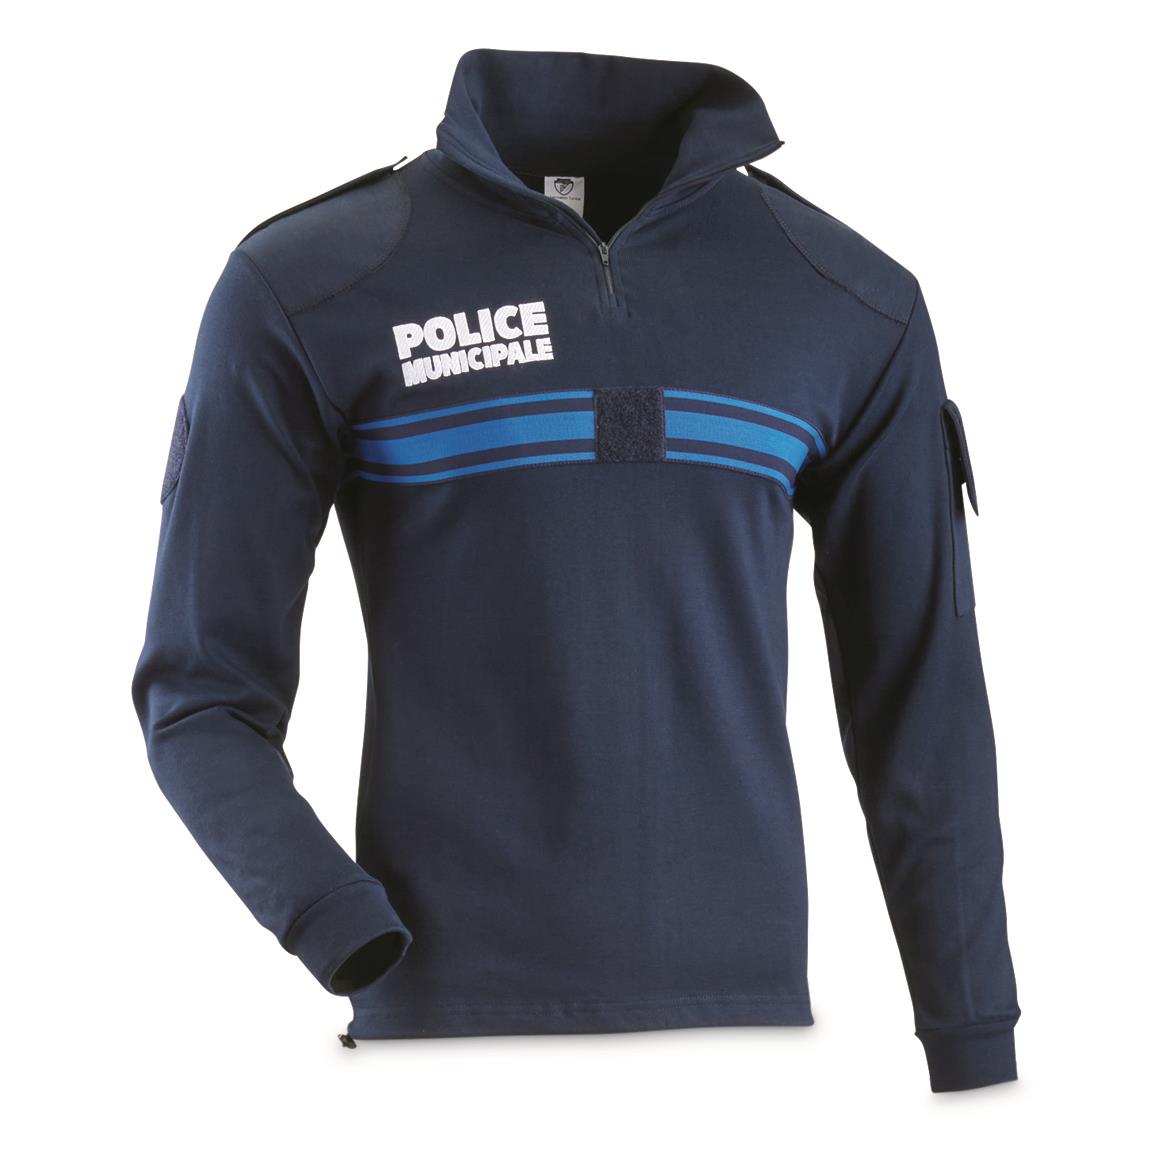 French Police Surplus Long Sleeve Quarter Zip Pullover, New, Navy